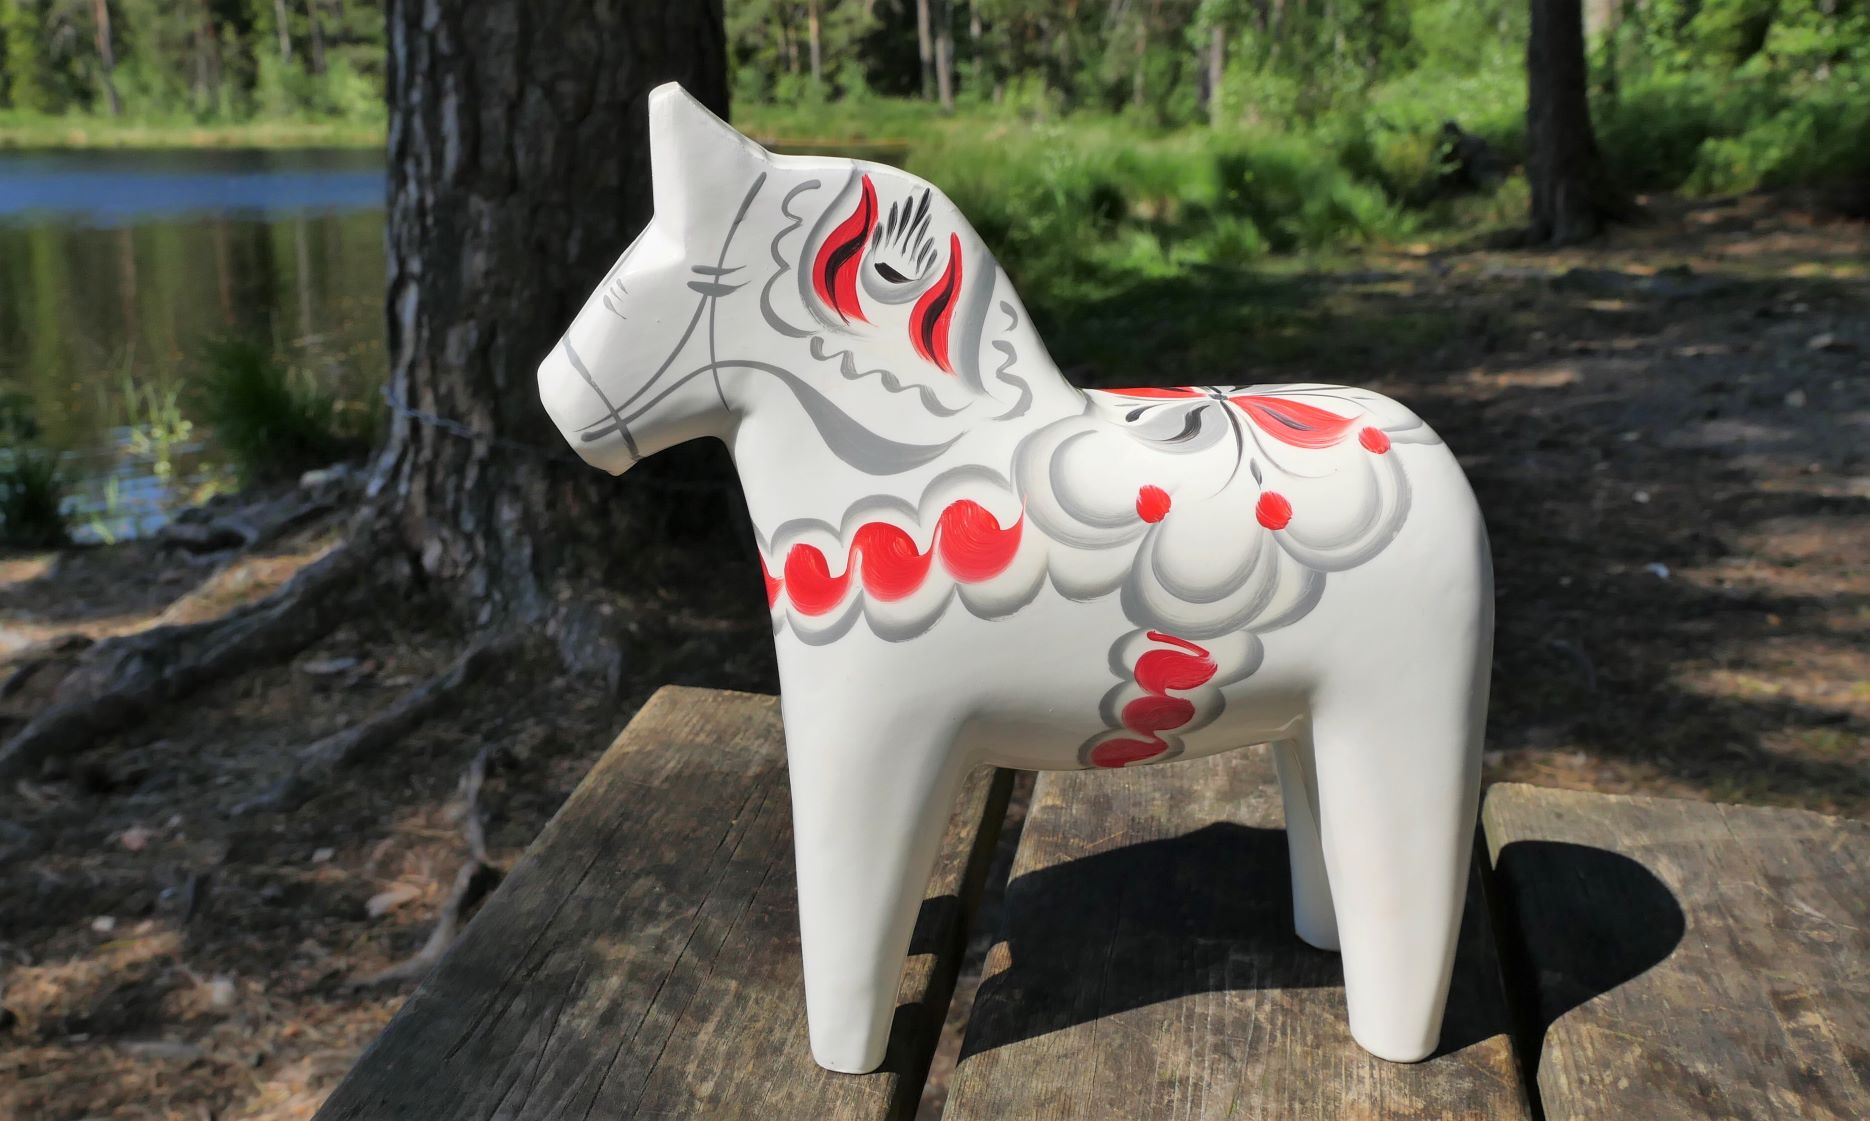 Dalahorse – from toy to national symbol